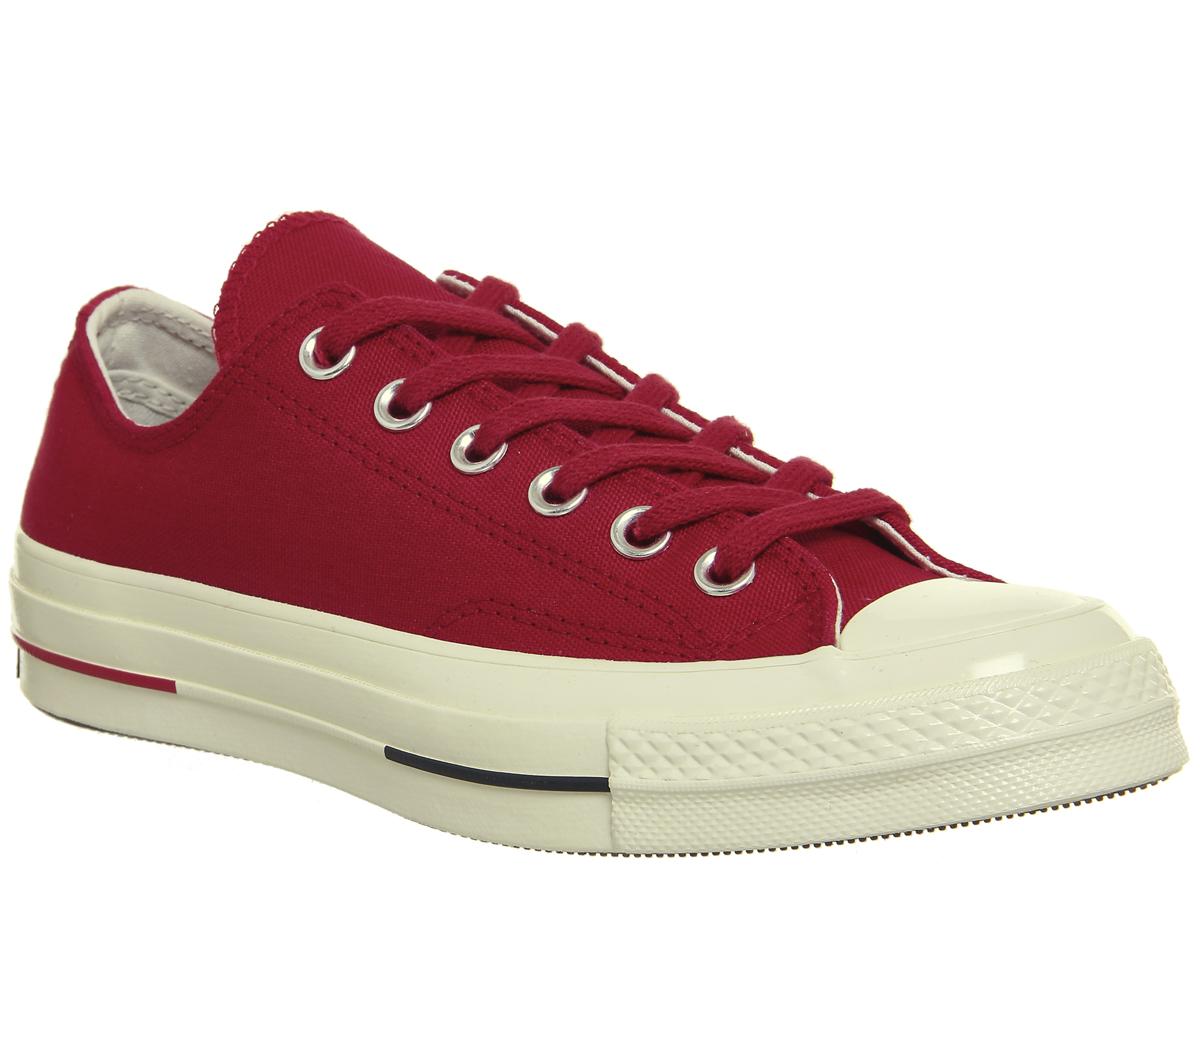 converse all star ox 70's gym red navy